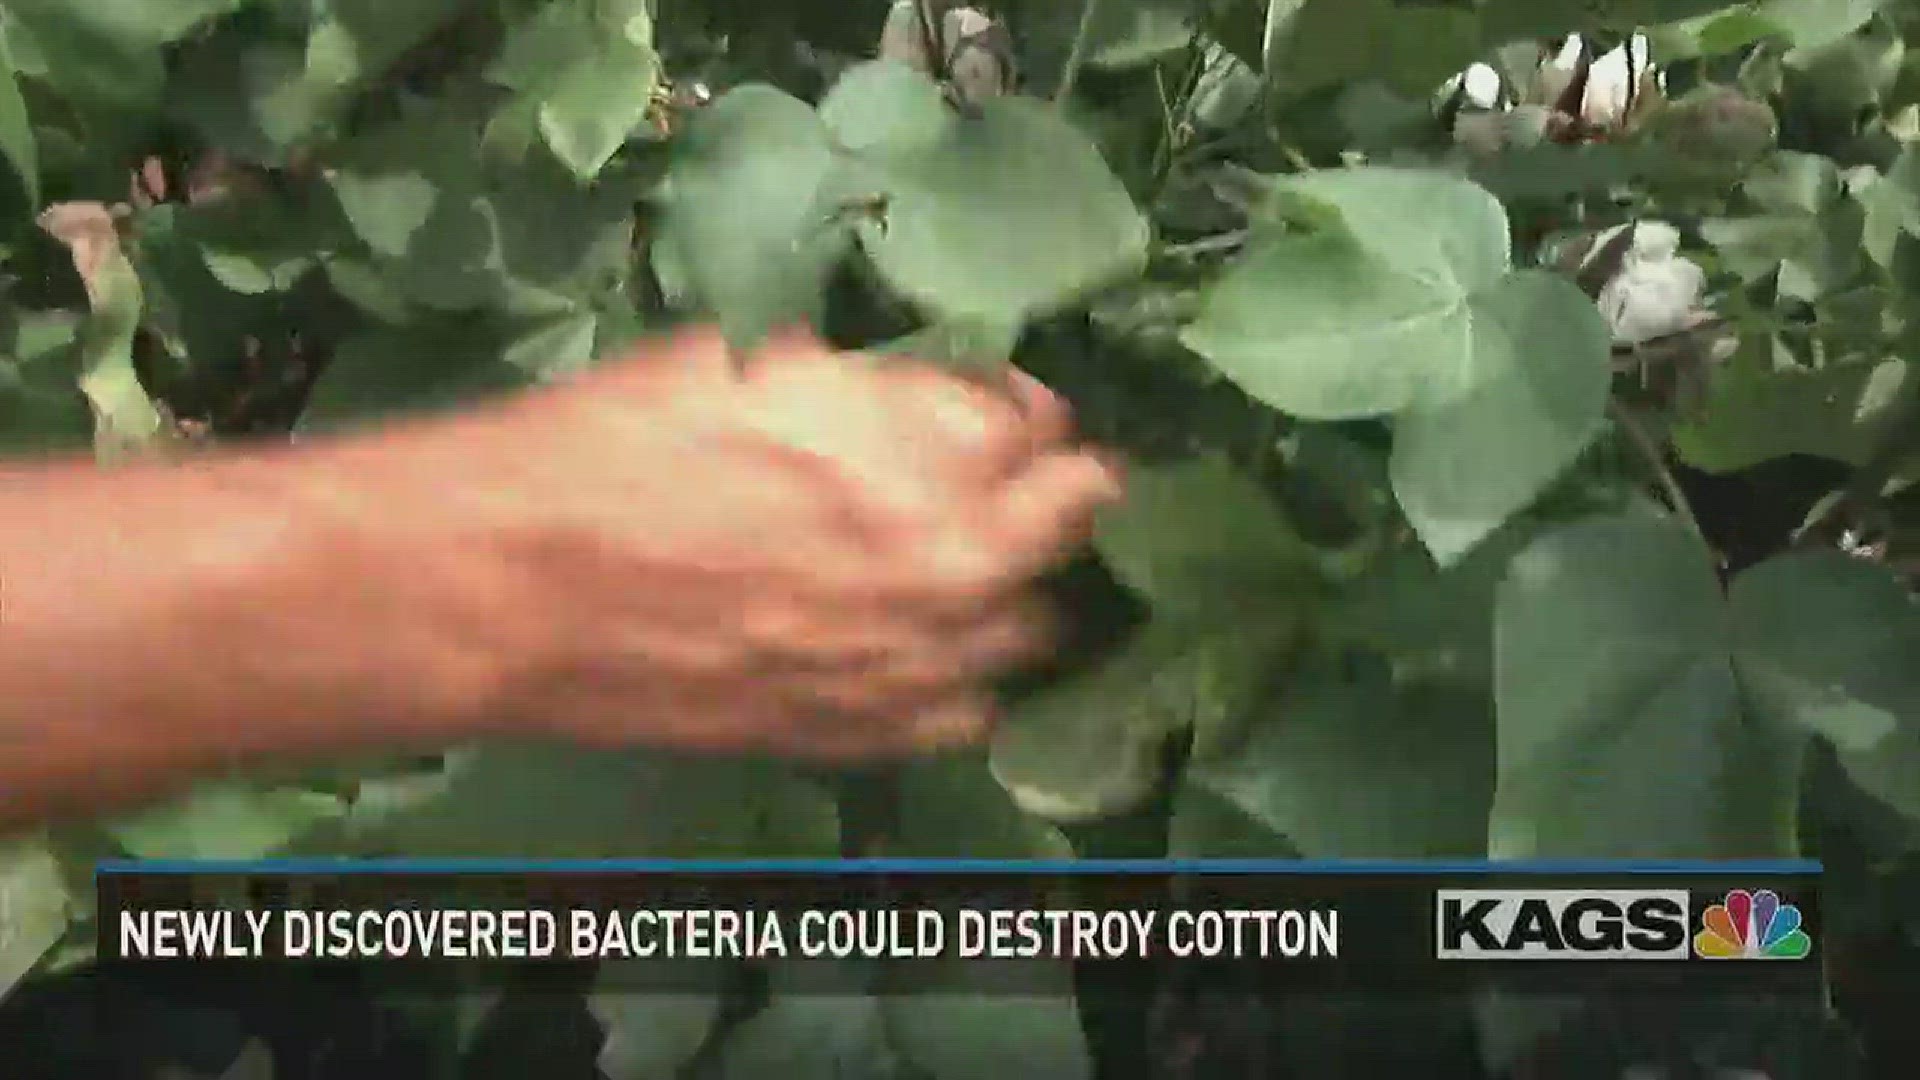 A researcher at Texas A&M discovered a new bacteria that can destroy cotton crops